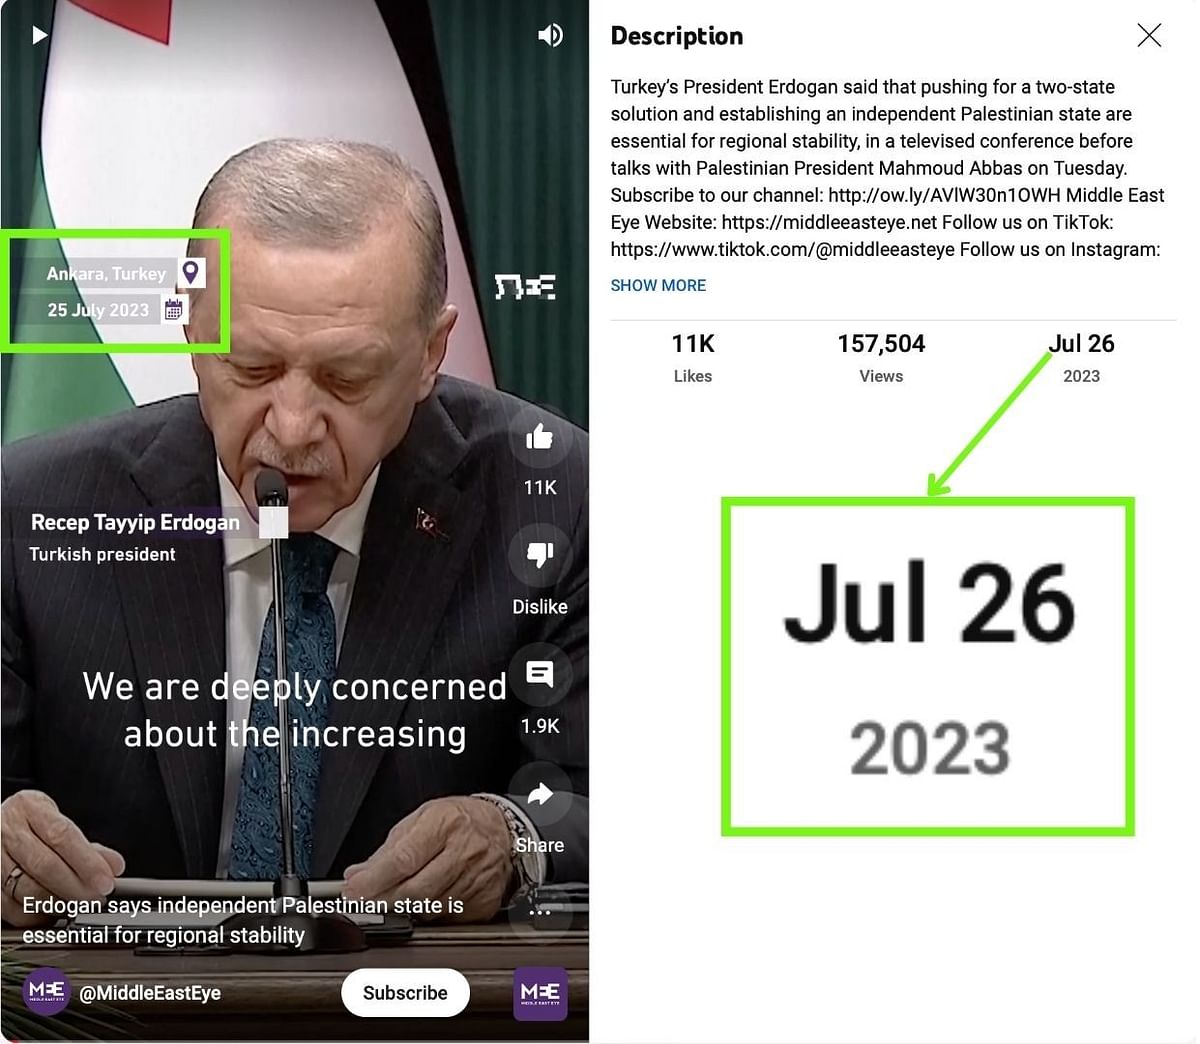 The original video dates back to July and shows Erdoğan expressing support for Palestine.